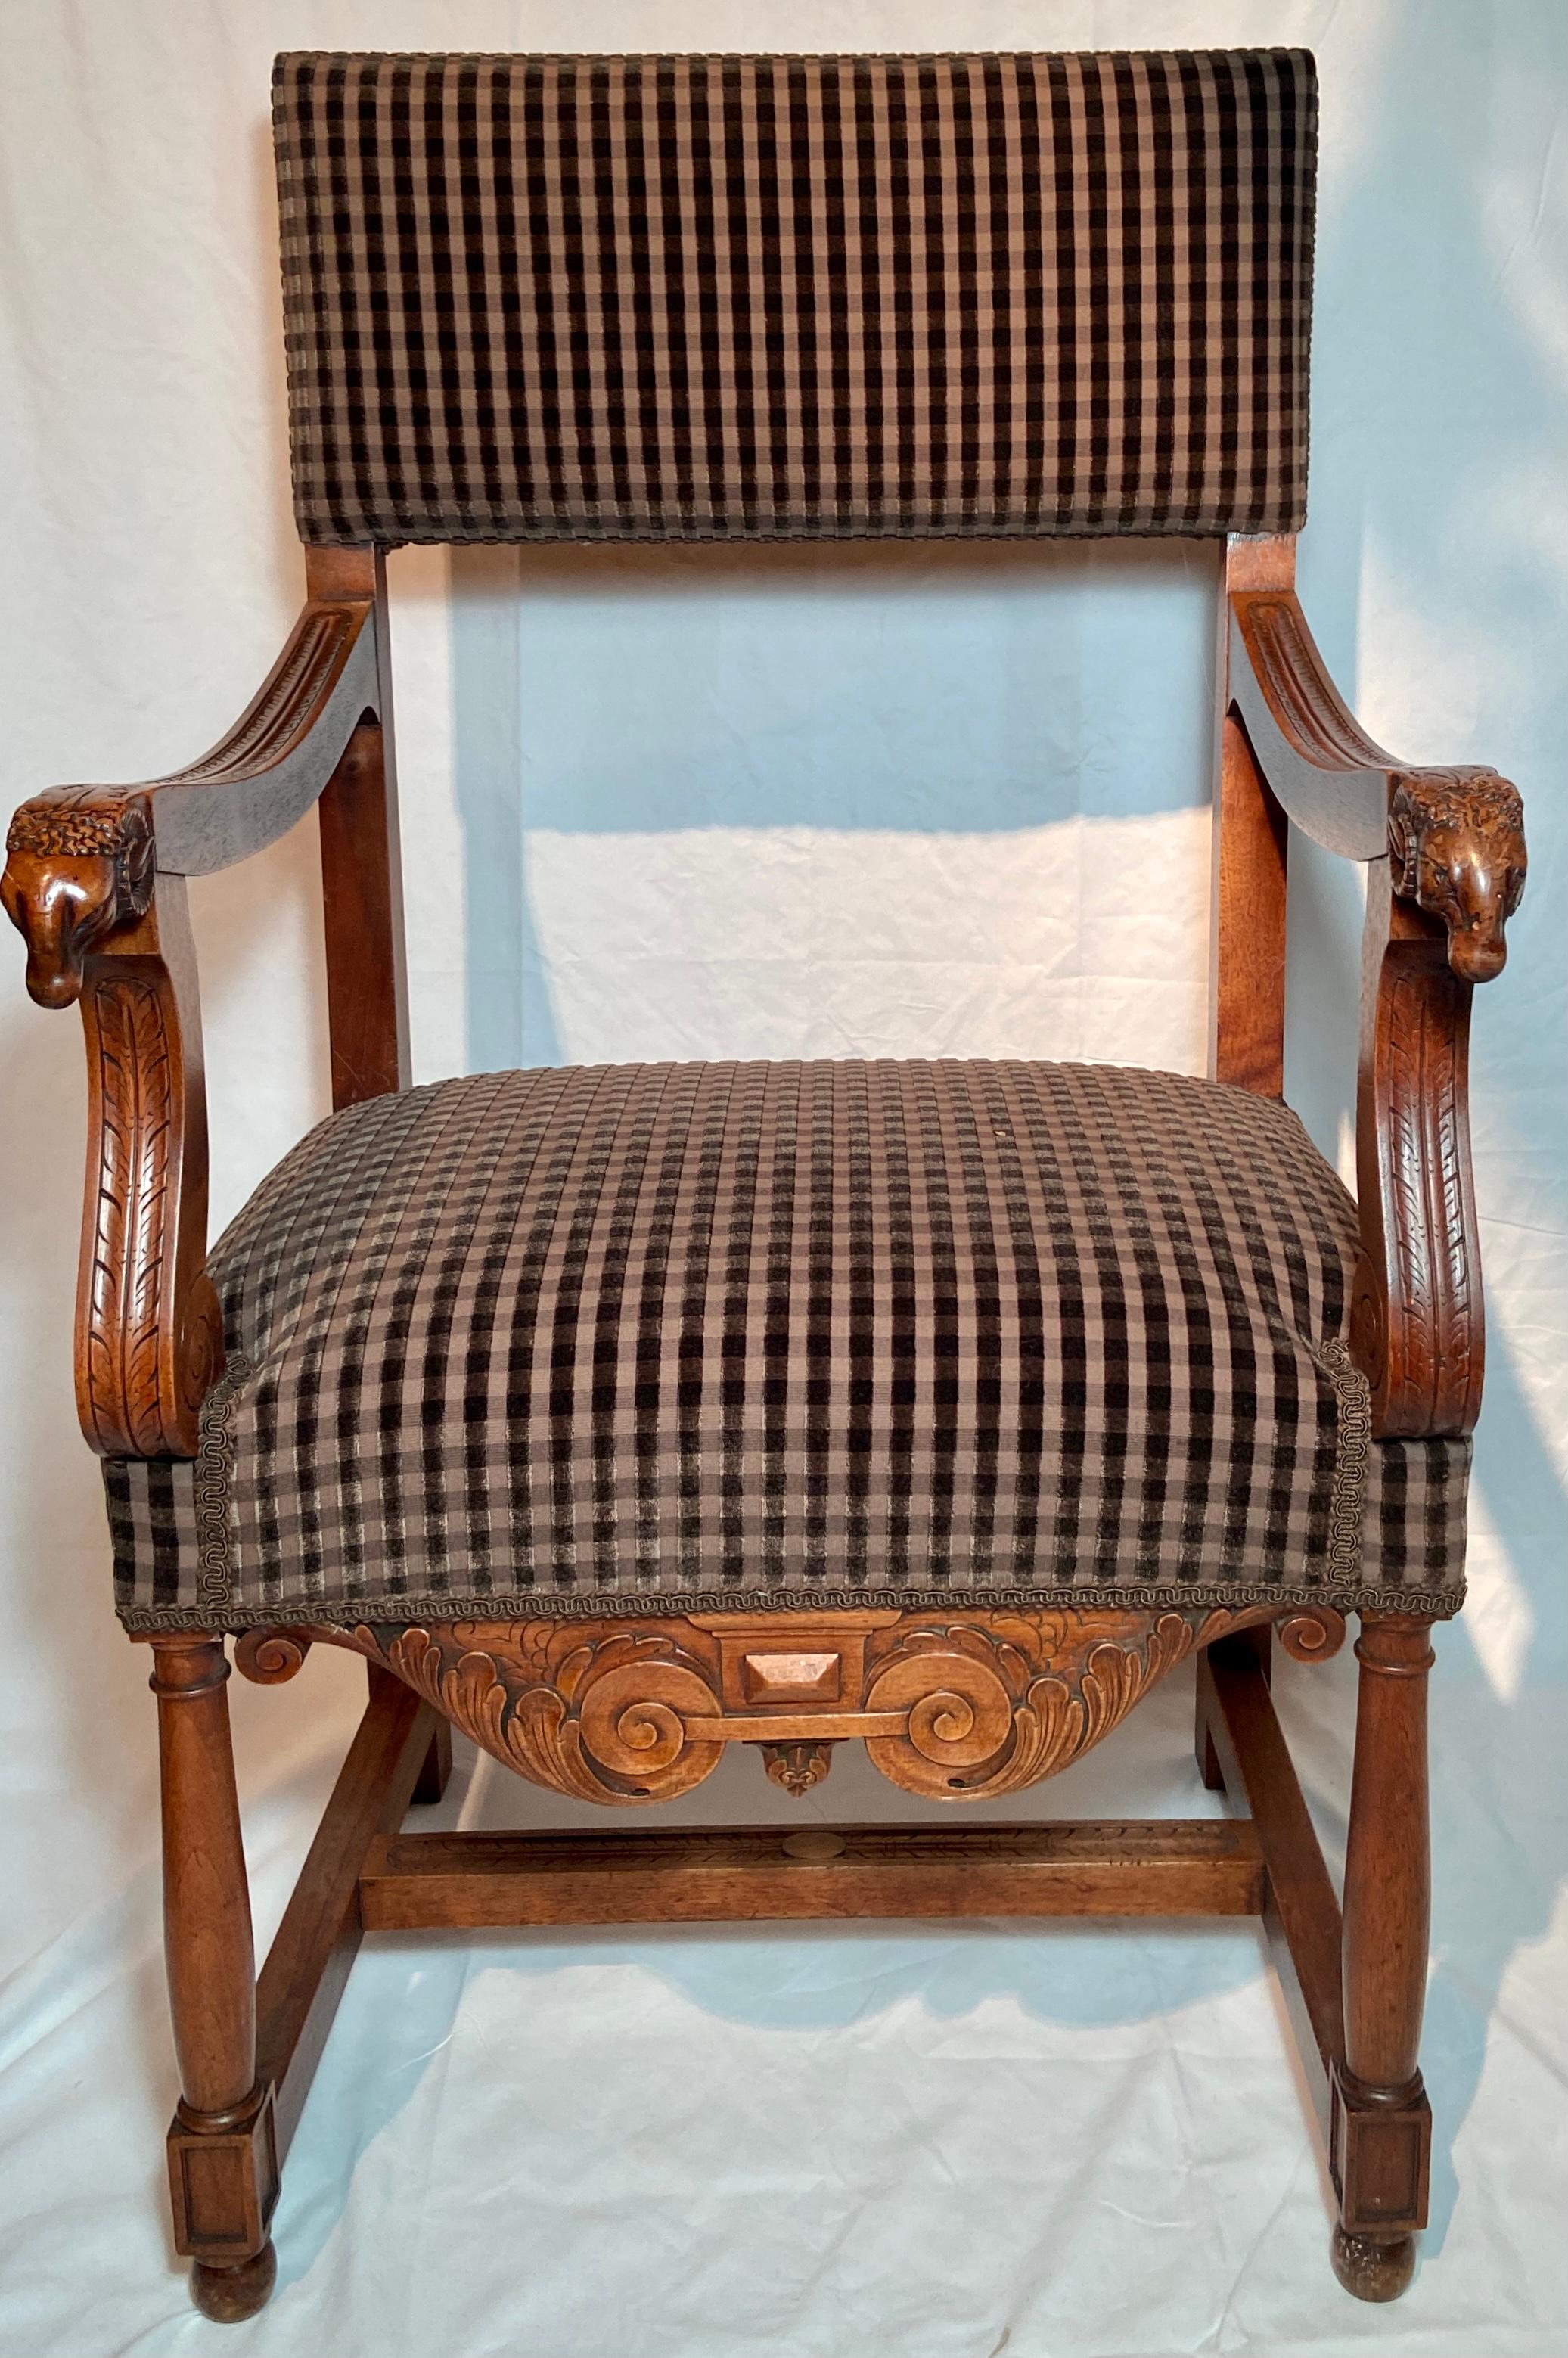 Pair Antique French country carved walnut arm chairs, Circa 1800s.